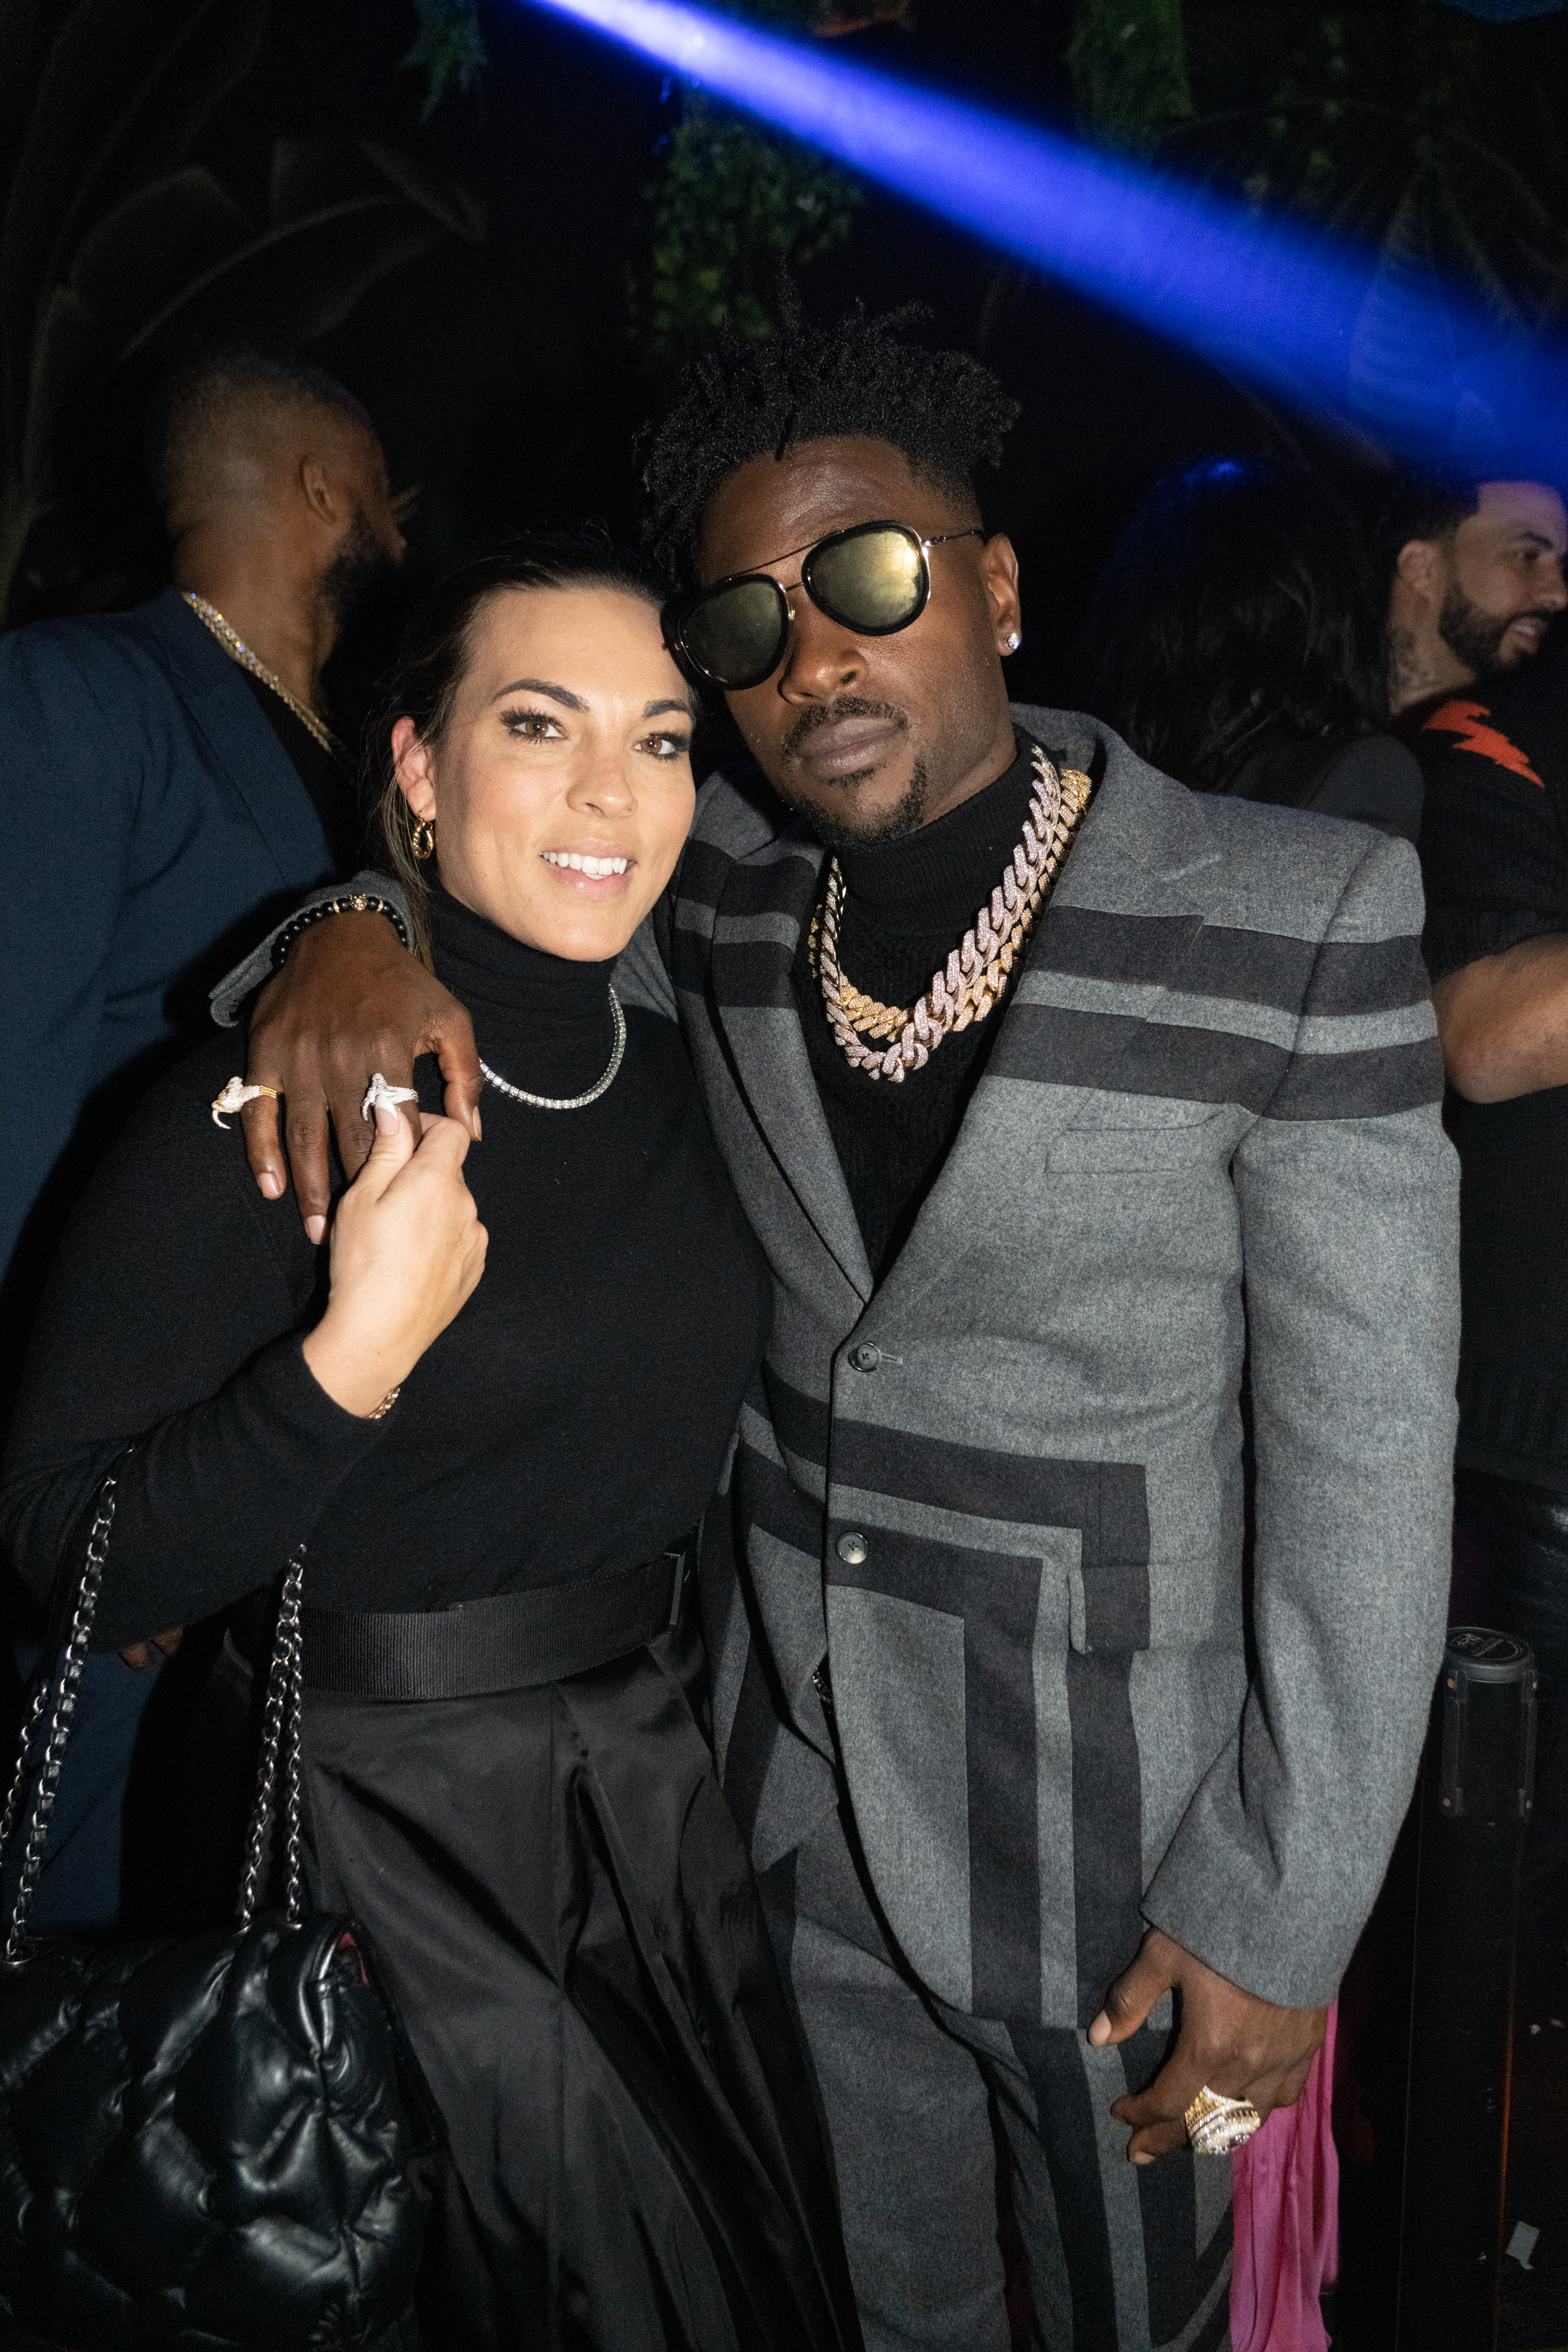 Chelsie Kyriss and Antonio brown at Rick Ross' birthday celebration on January 26, 2022, in Miami, Florida. | Source: Getty Images